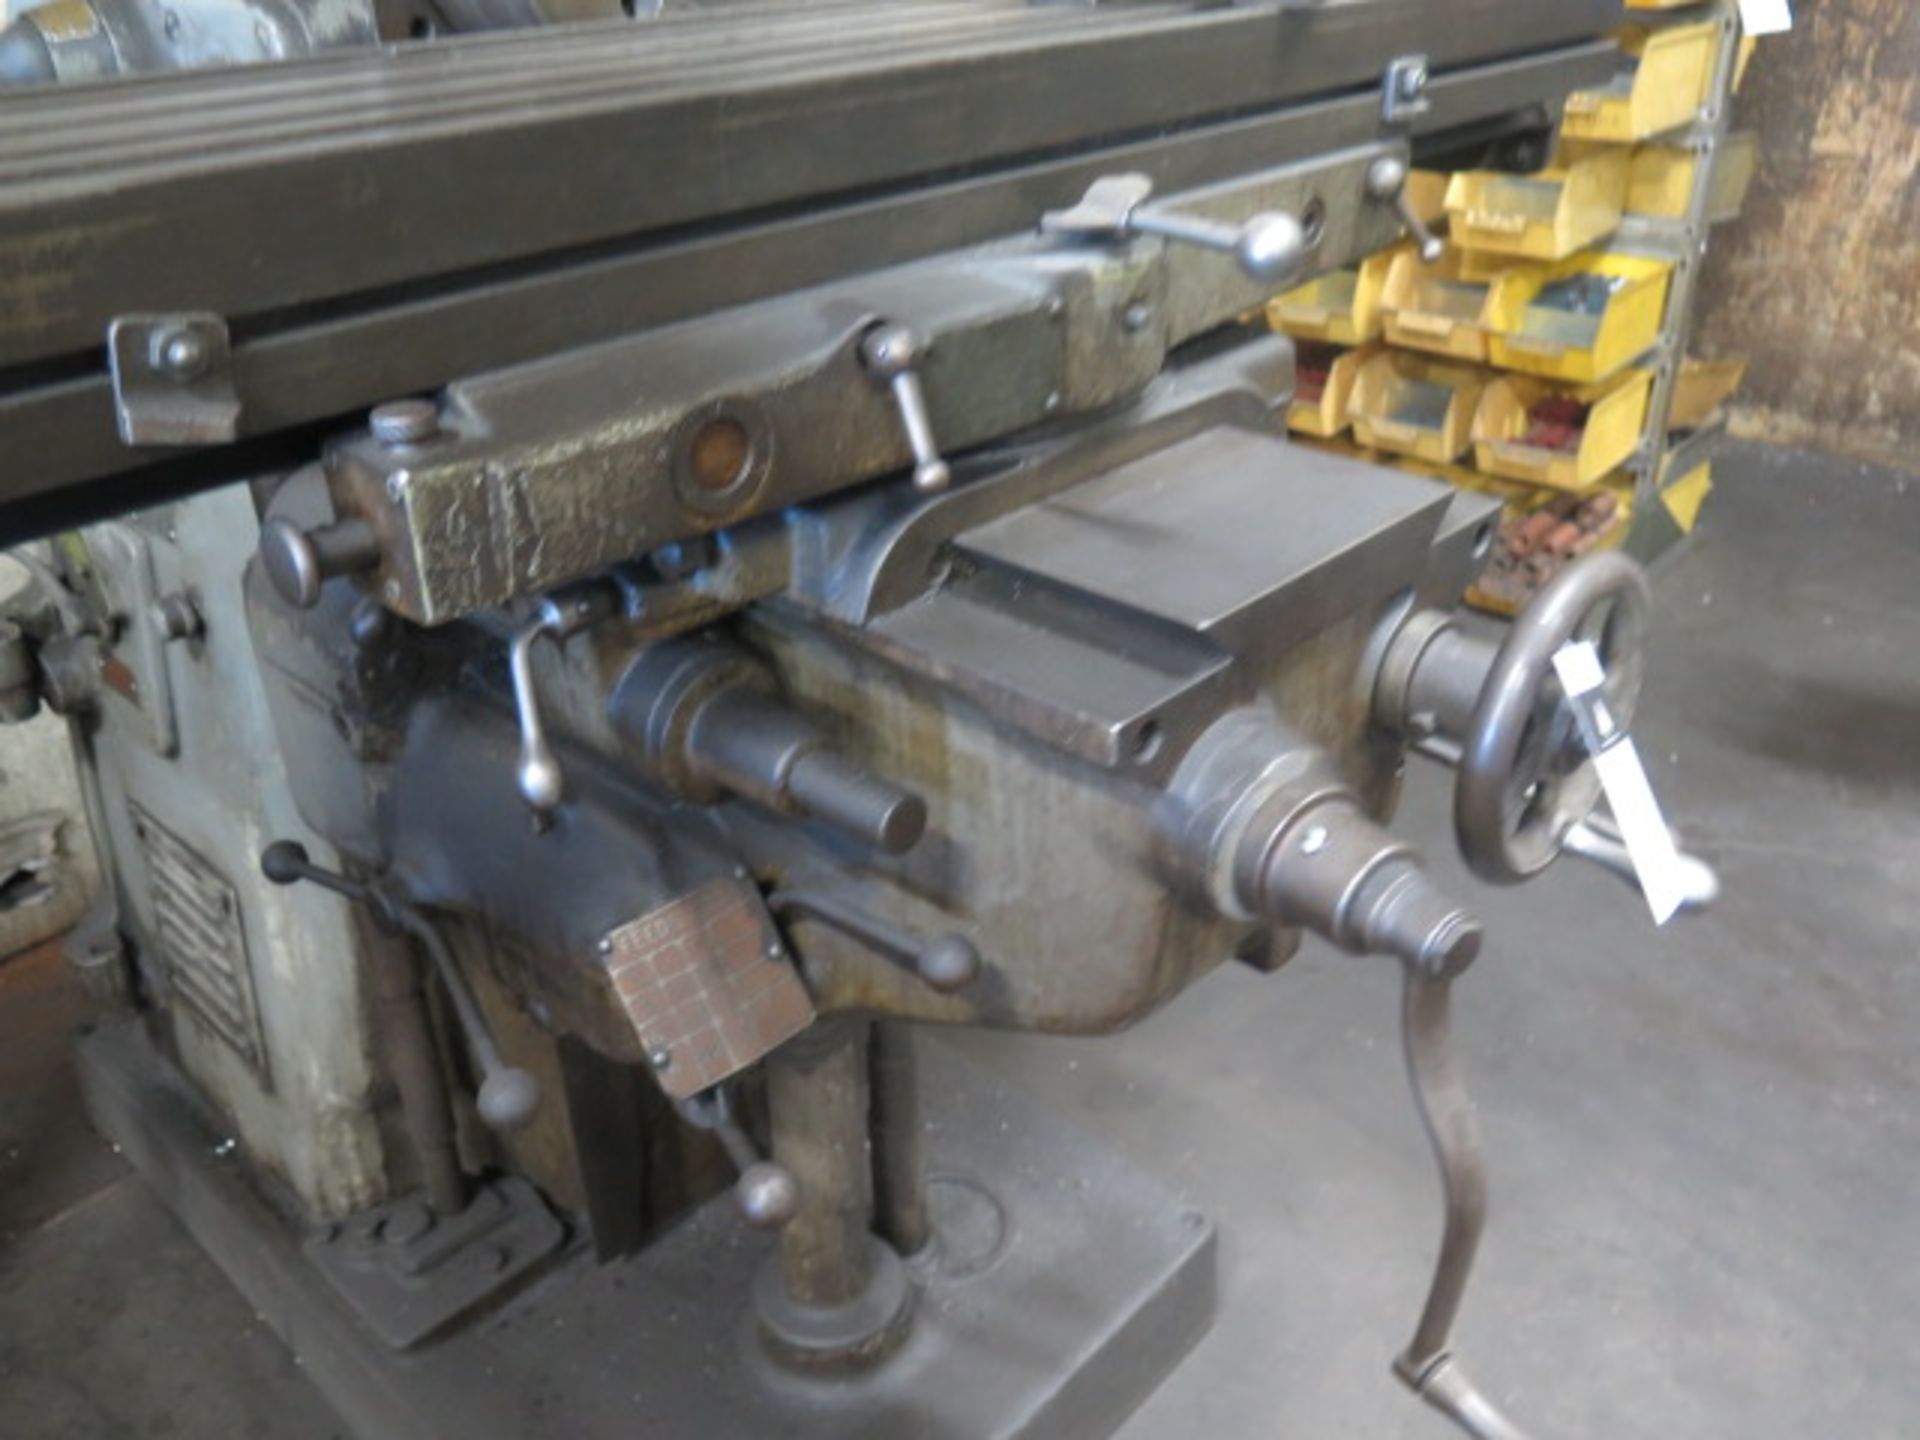 Cincinnati No. 2MH Horizontal Mill w/ 23-1200 RPM, 50 Taper Spindle, Power Feeds, 10 1/2" x 53" - Image 4 of 5